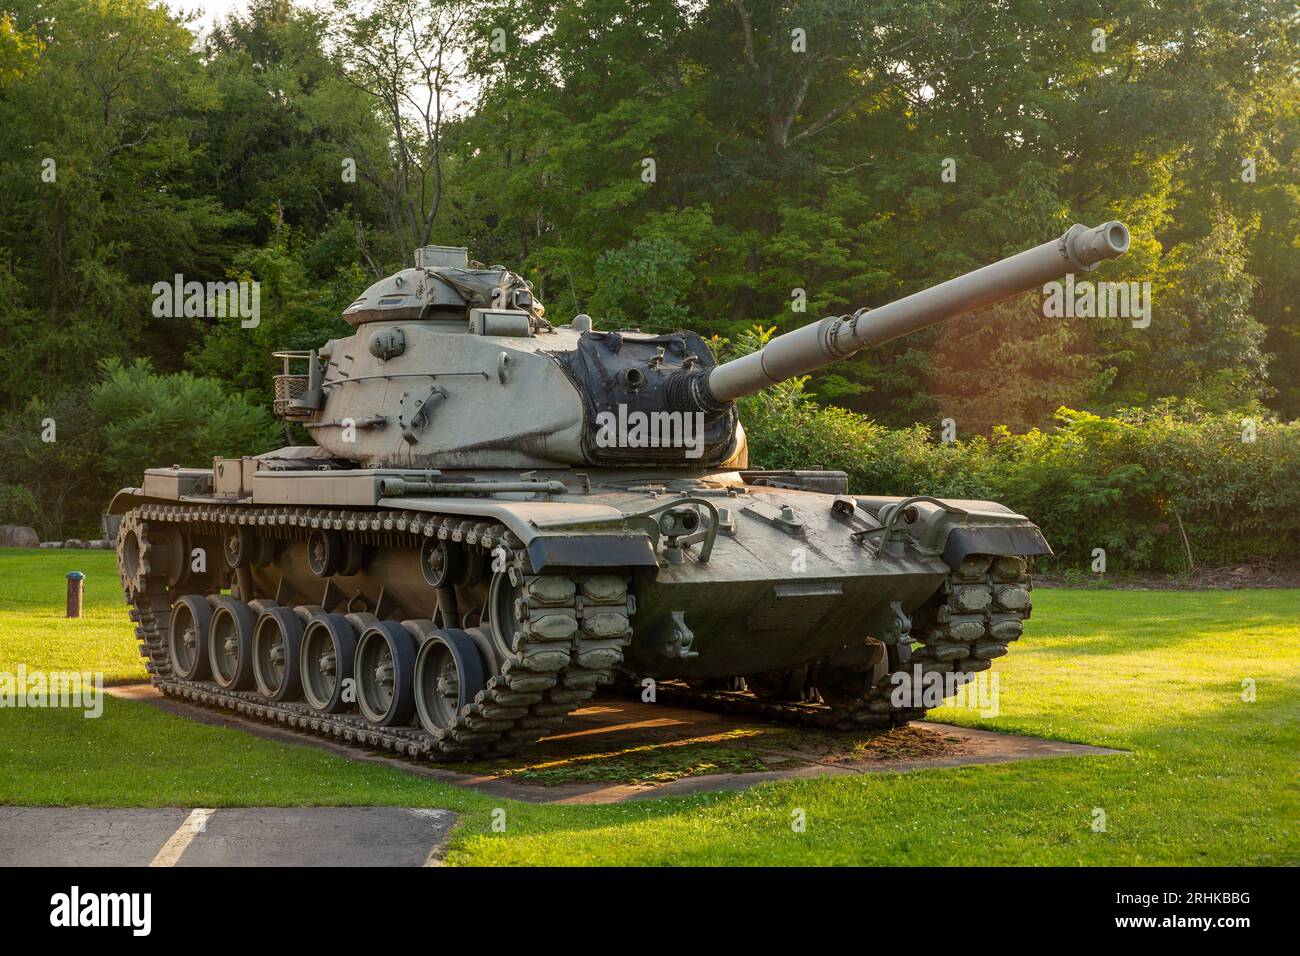 Vietnam era M-60 tank as part of the memorial for veterans of all wars at the American Legion, Post 257, Stoystown, PA 15563 Stock Photo